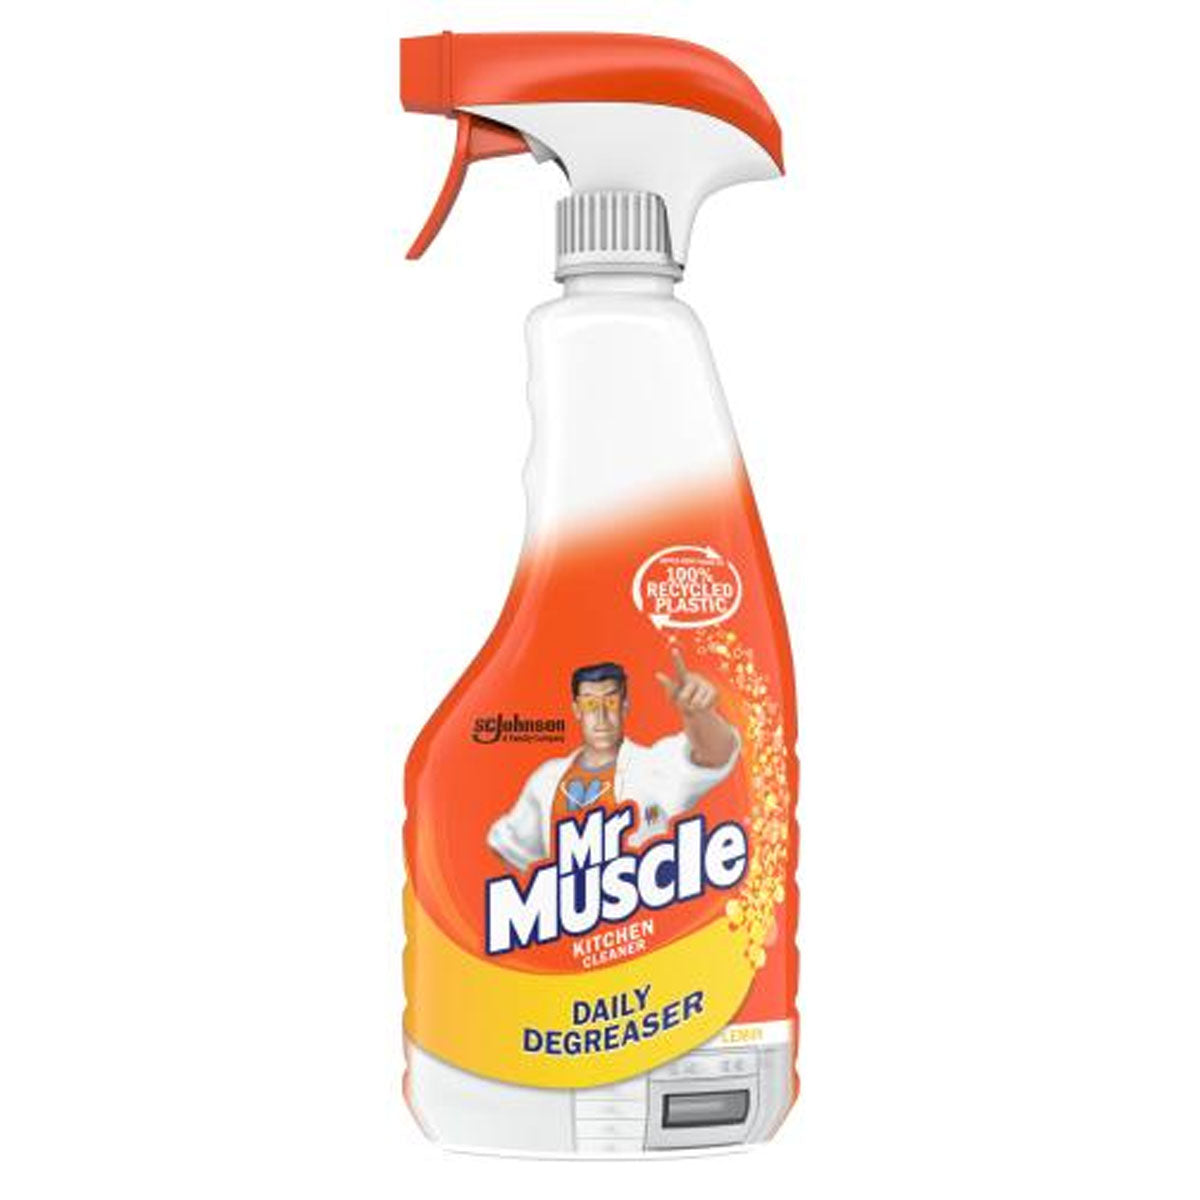 A bottle of Mr Muscle - Daily Degreaser Kitchen Cleaning Spray - 500ml on a white background.